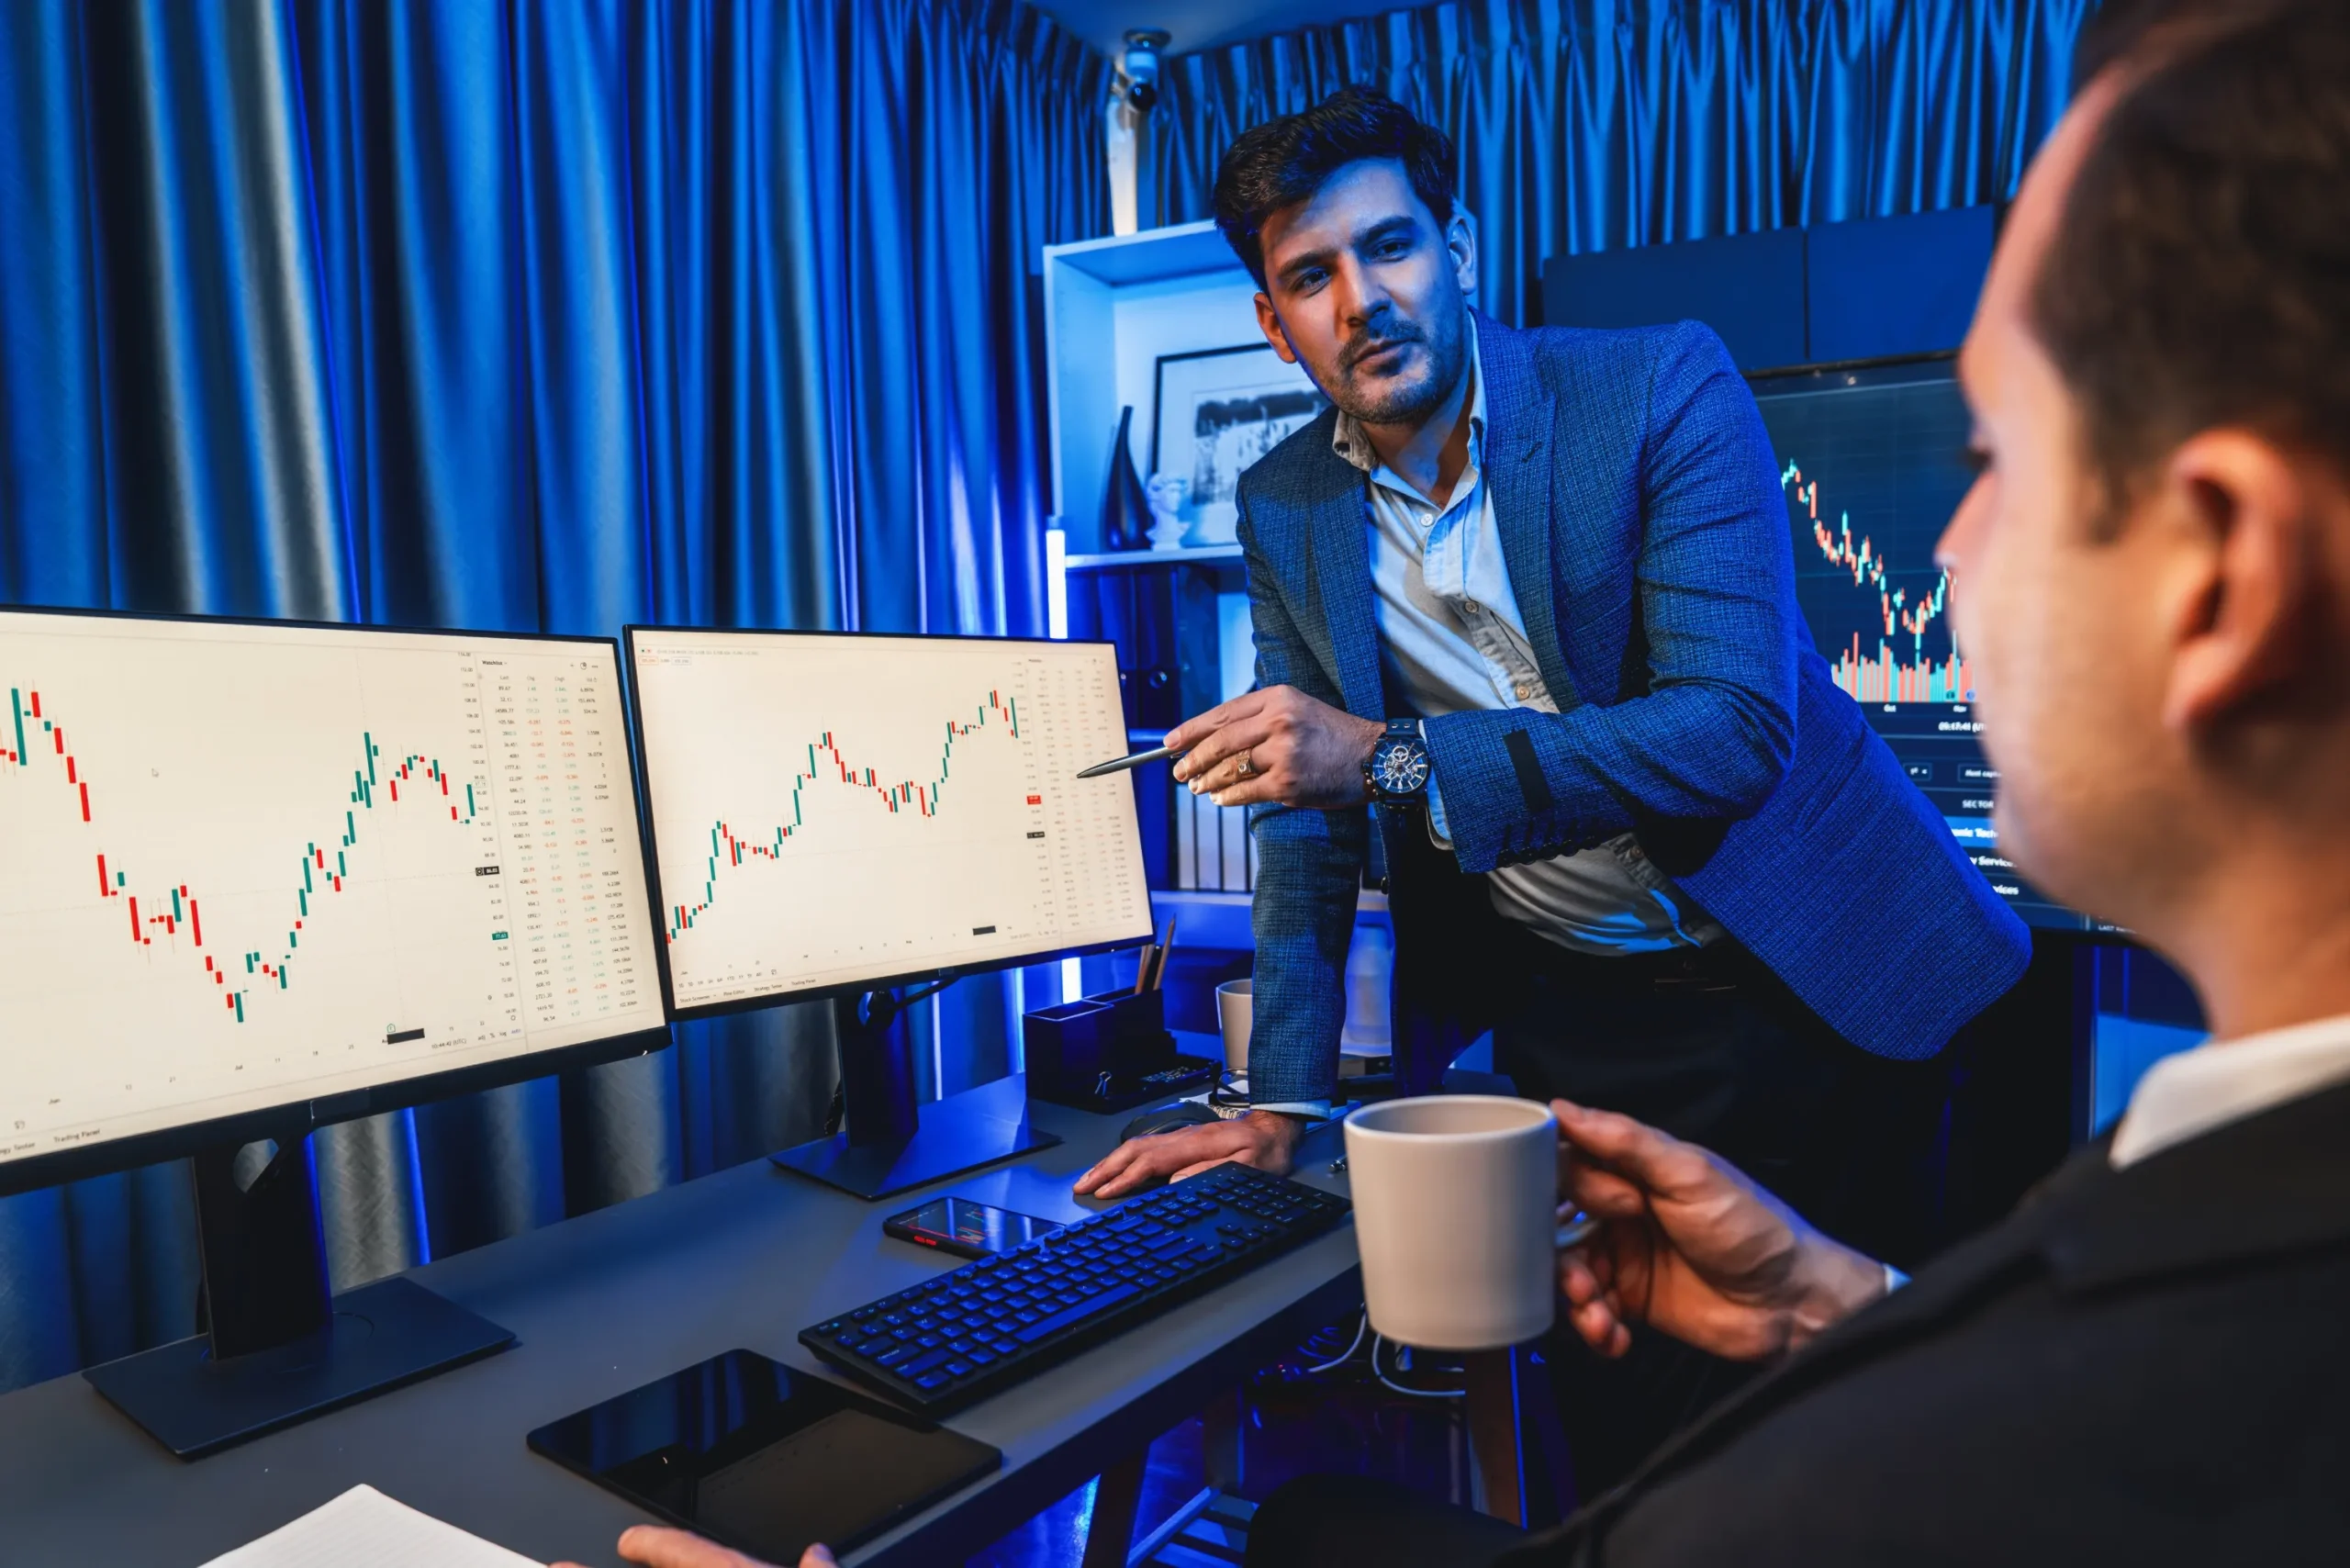 two-stock-exchange-traders-discussing-dynamic-investment-graph-currency-rate-monitor-night-businessman-partners-coffee-meeting-high-stock-market-neon-light-workplace-sellable